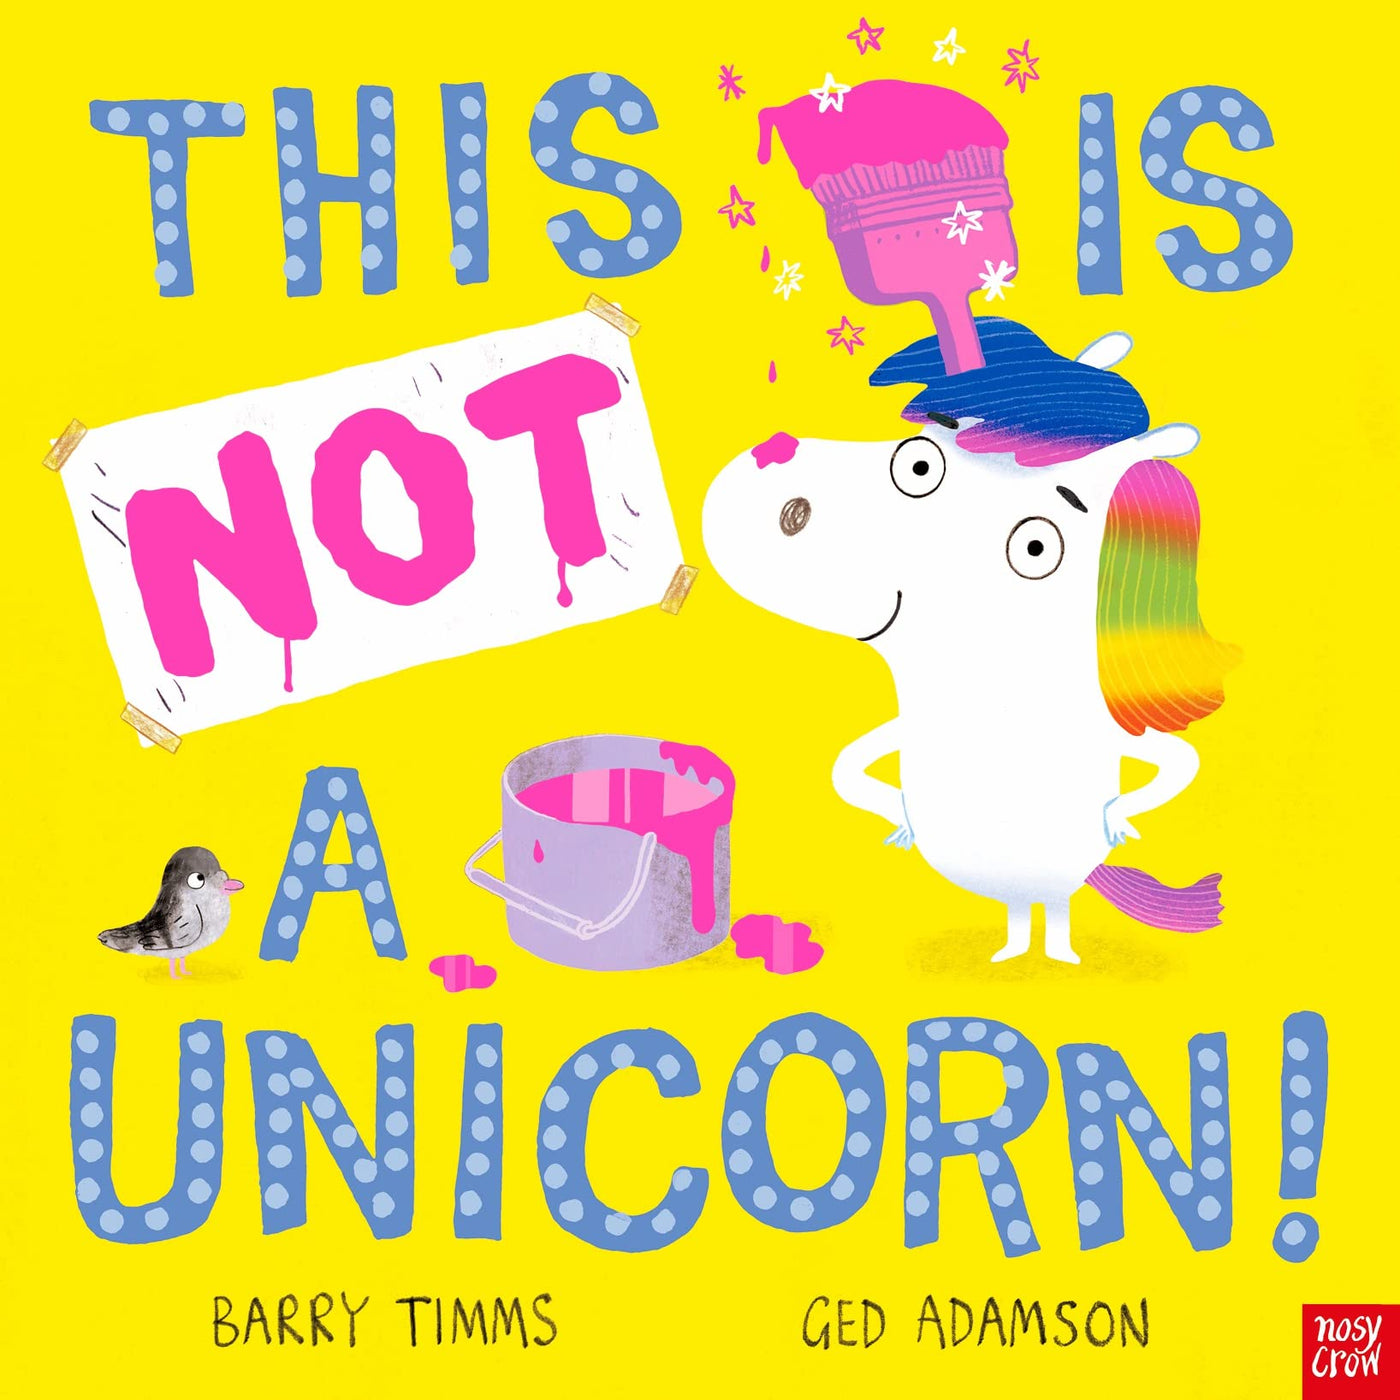 This is NOT a Unicorn!